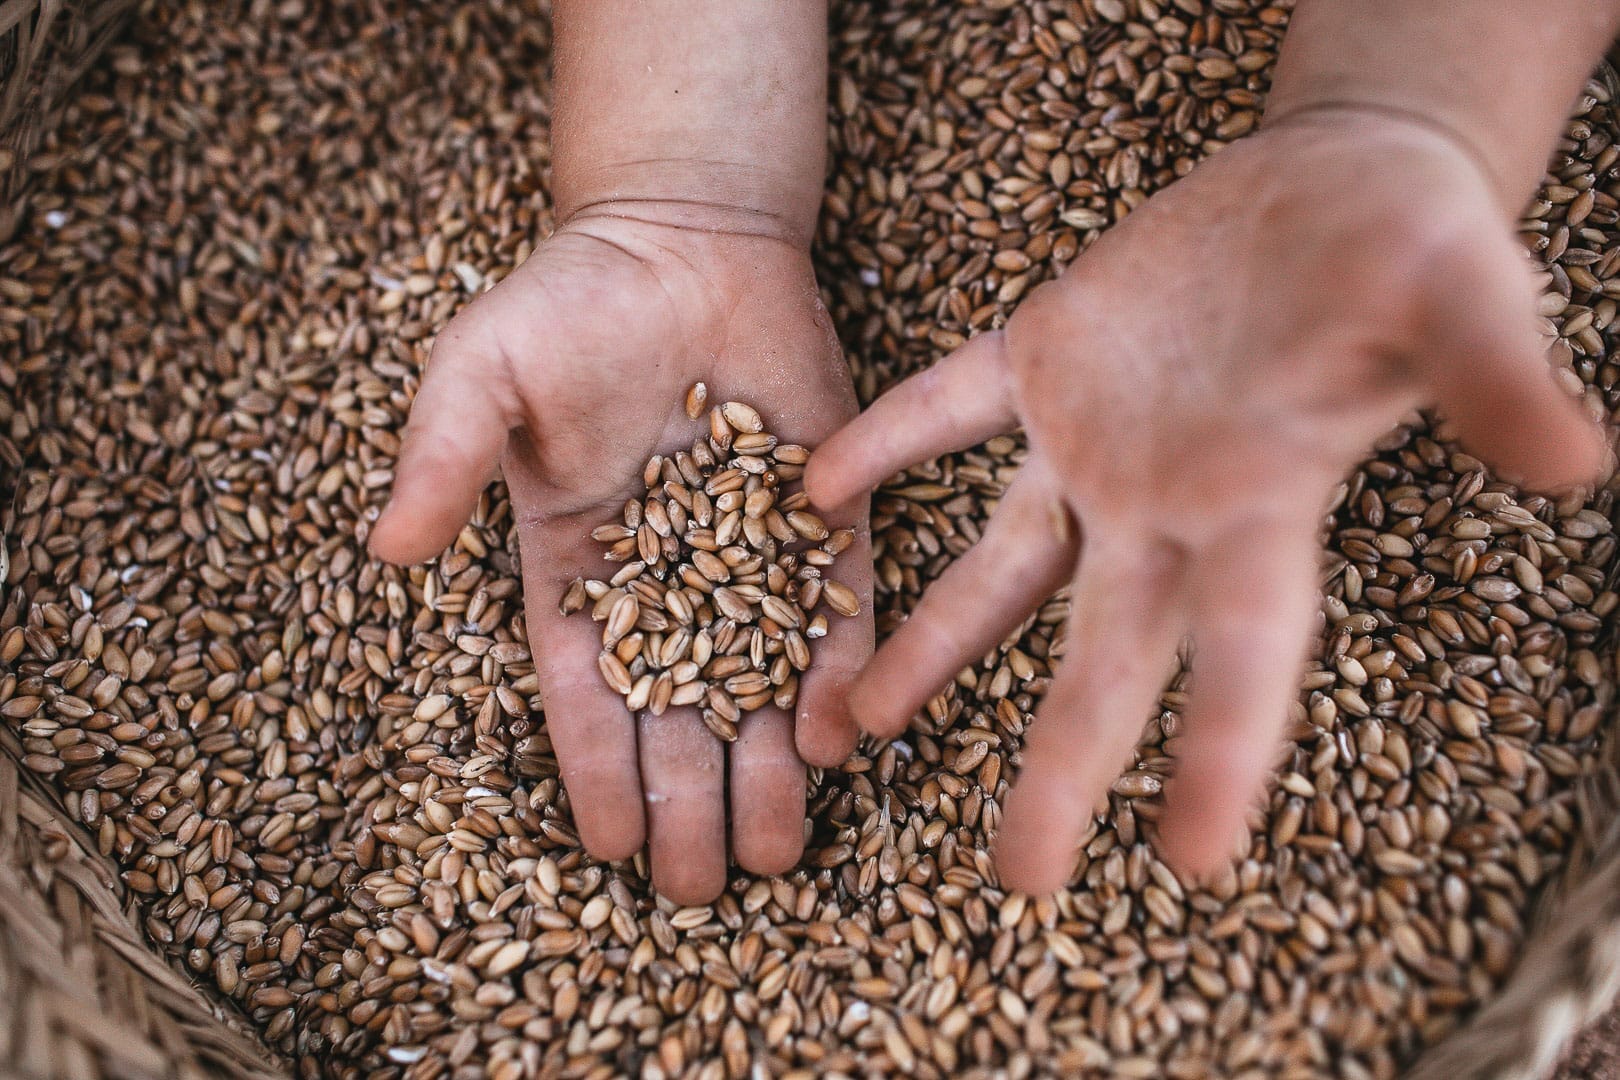 Photo of a child's hands inside a basket full of wheat seeds